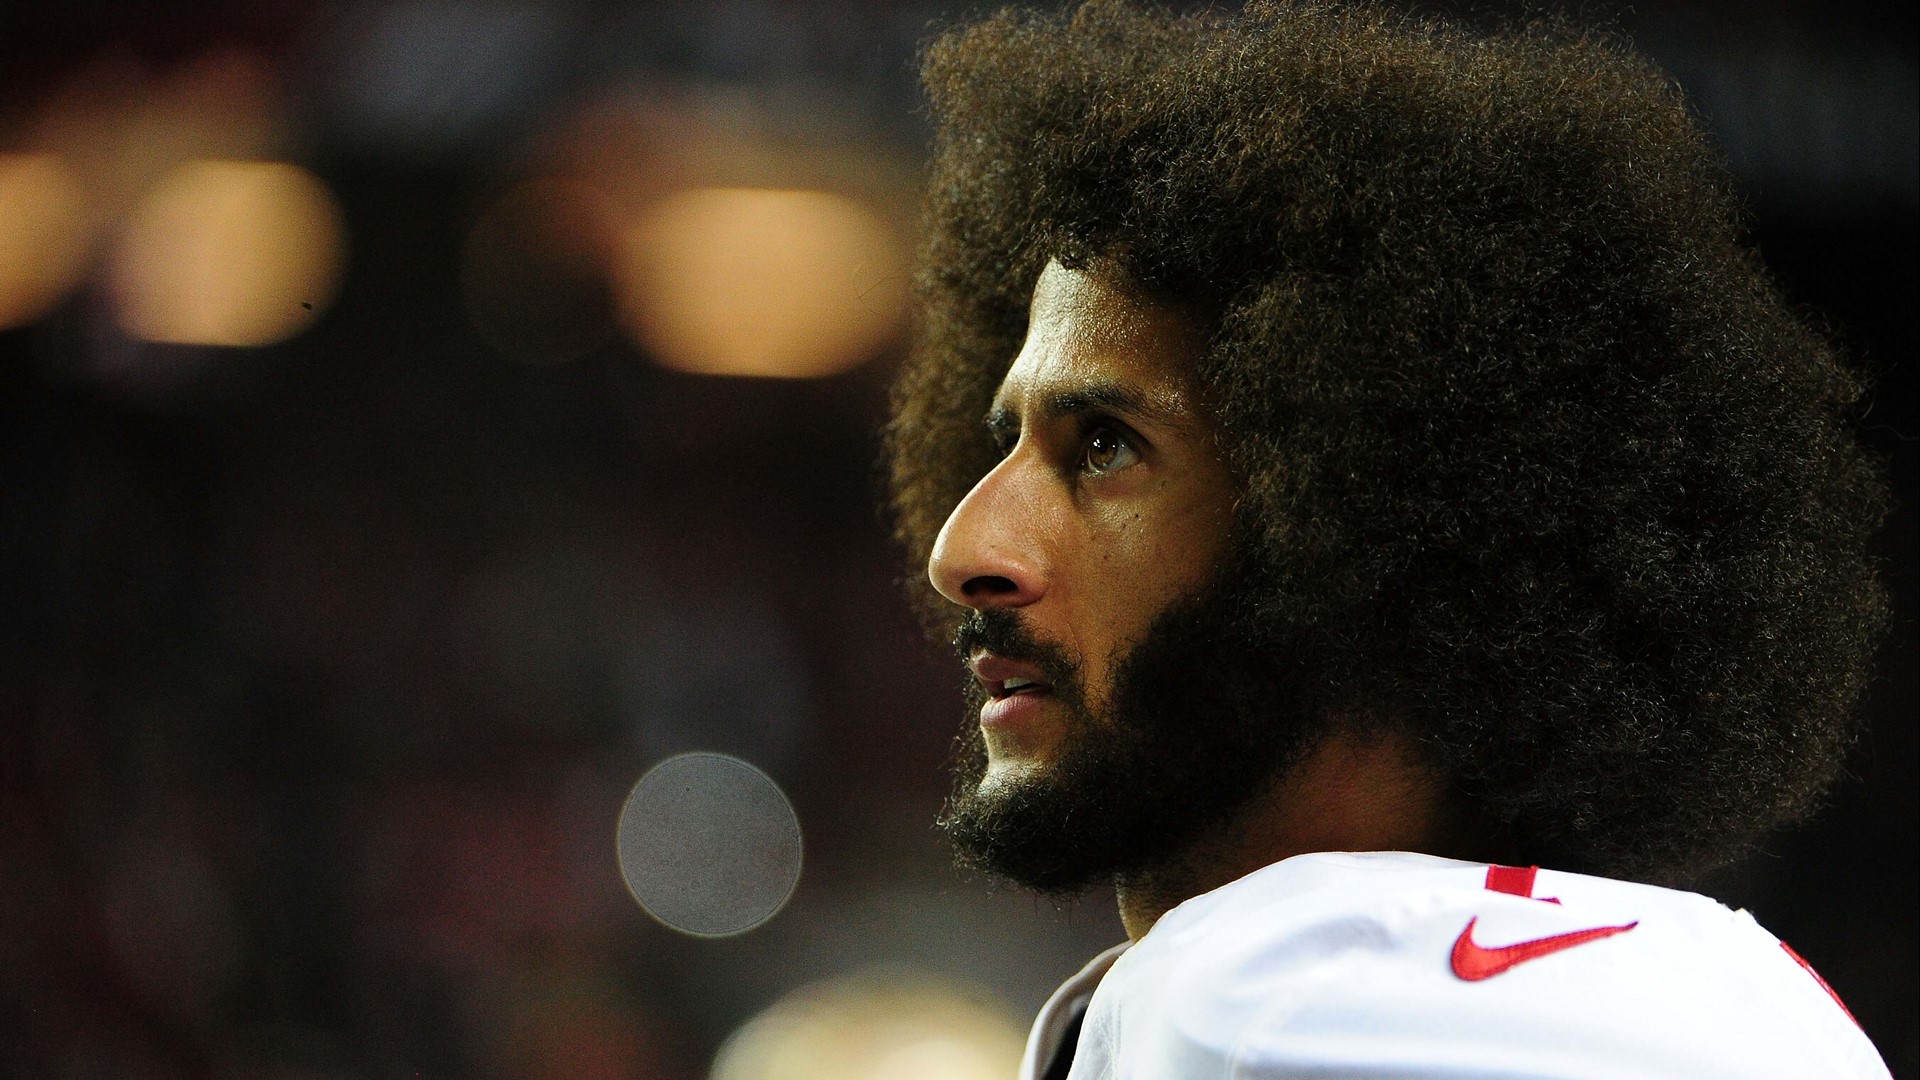 With Colin Kaepernick's collusion lawsuit against the NFL settled, his attorney believes the Carolina Panthers would be a good landing spot for the former 49ers quarterback.